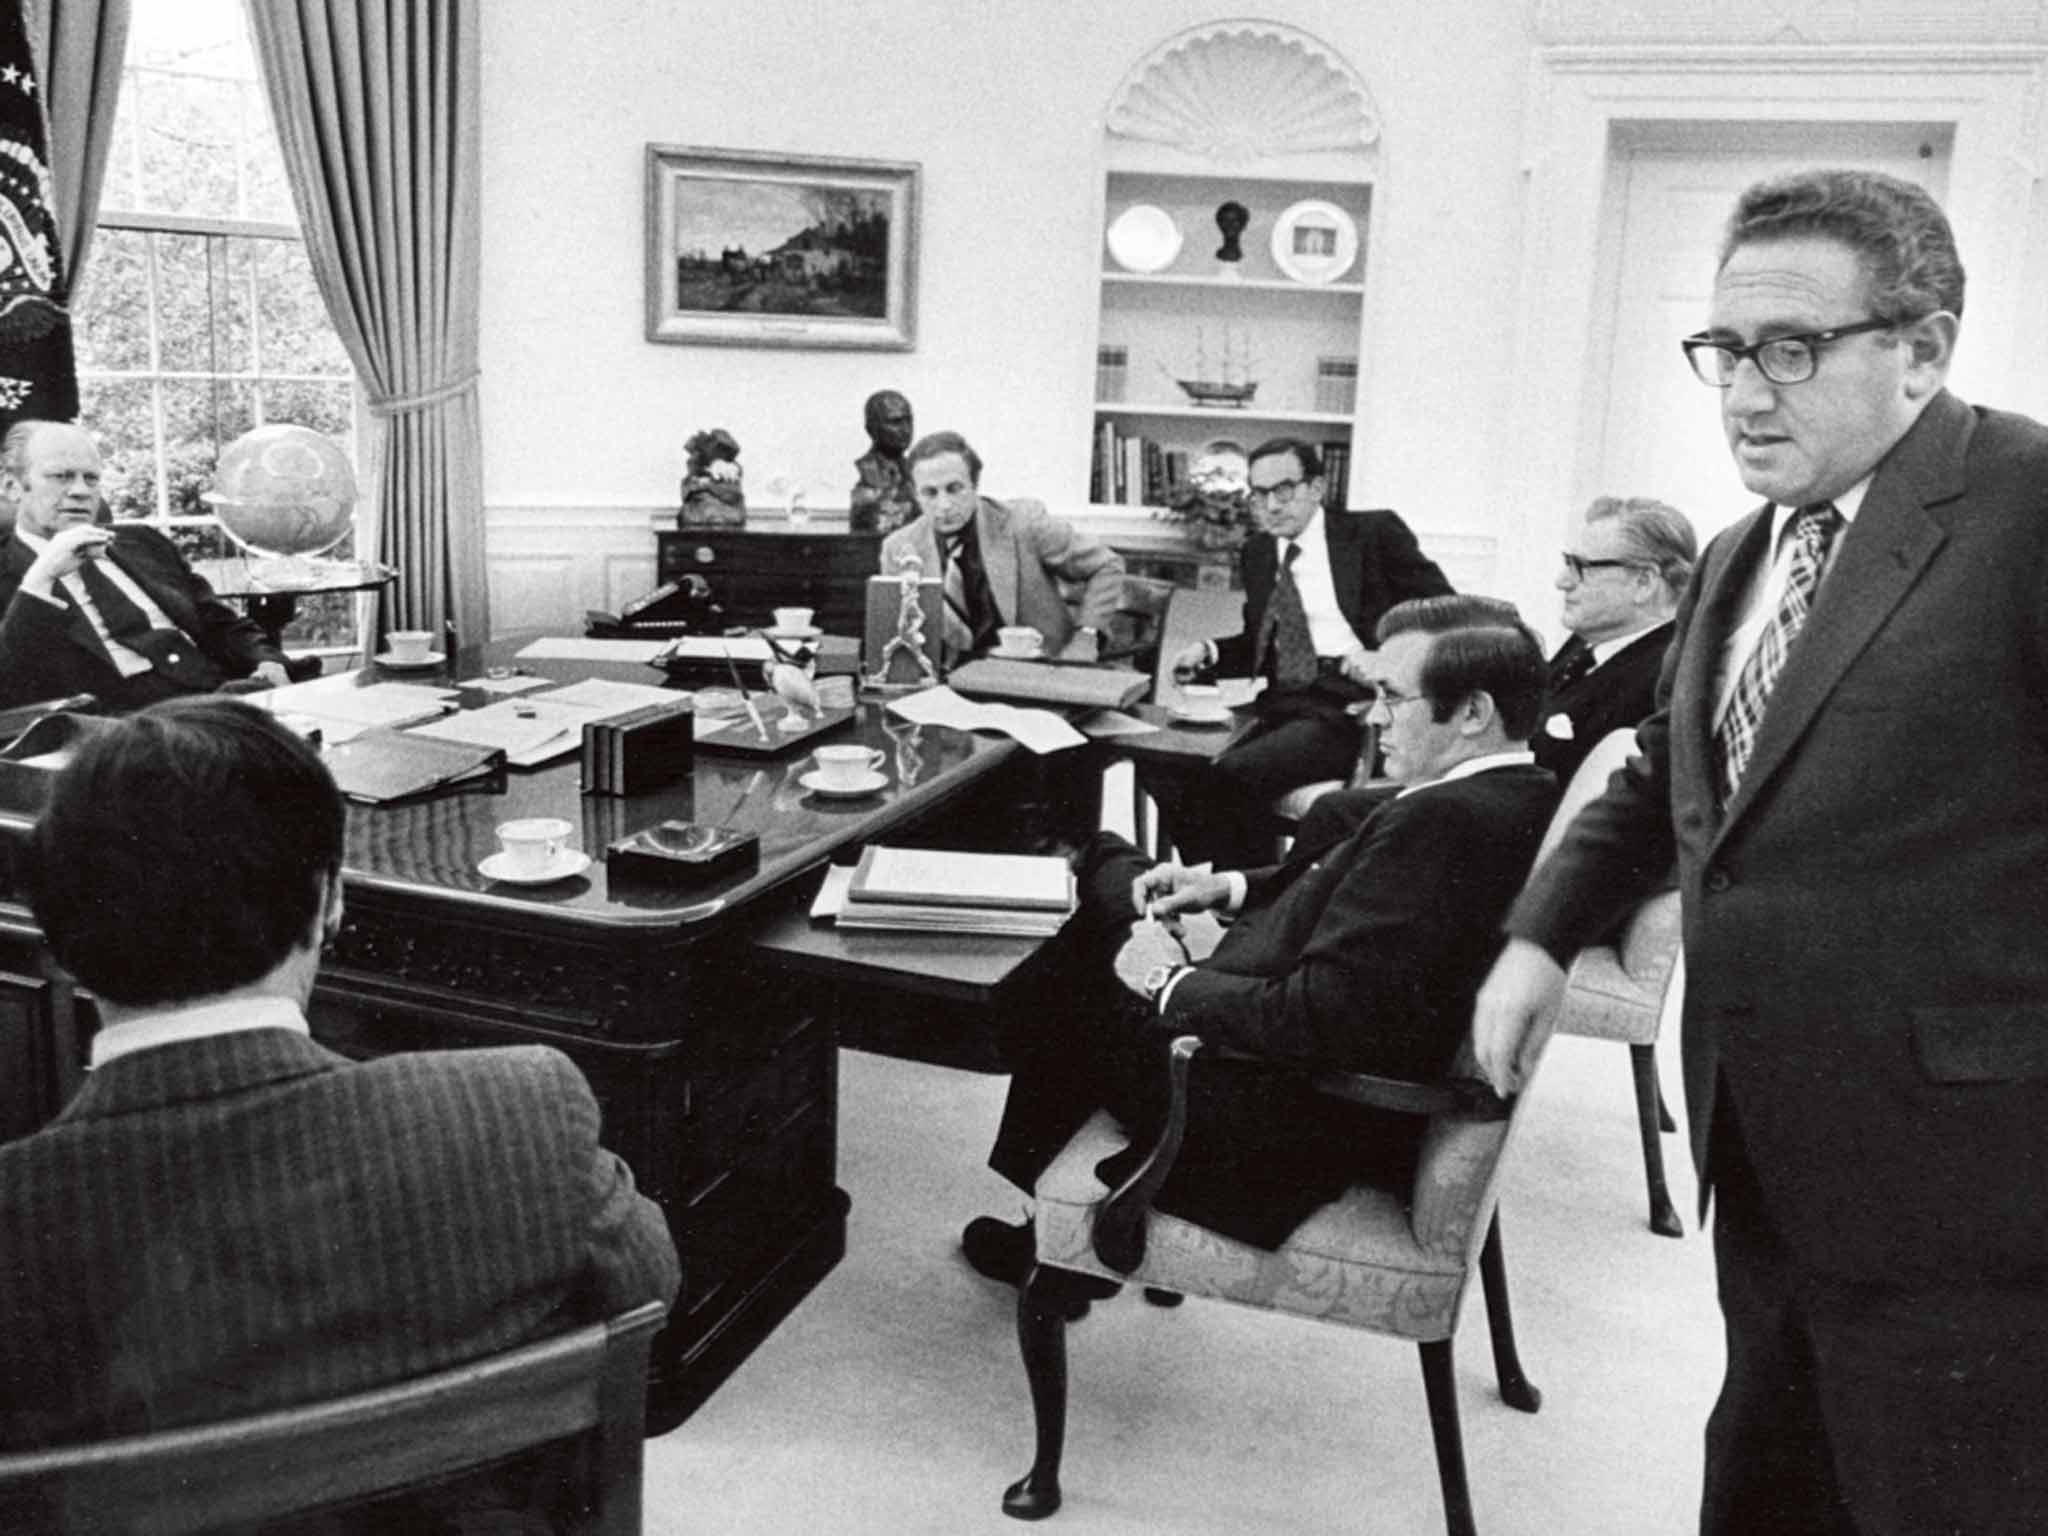 President Ford holding a meeting in 1975, when Kissinger (right) was Secretary of State